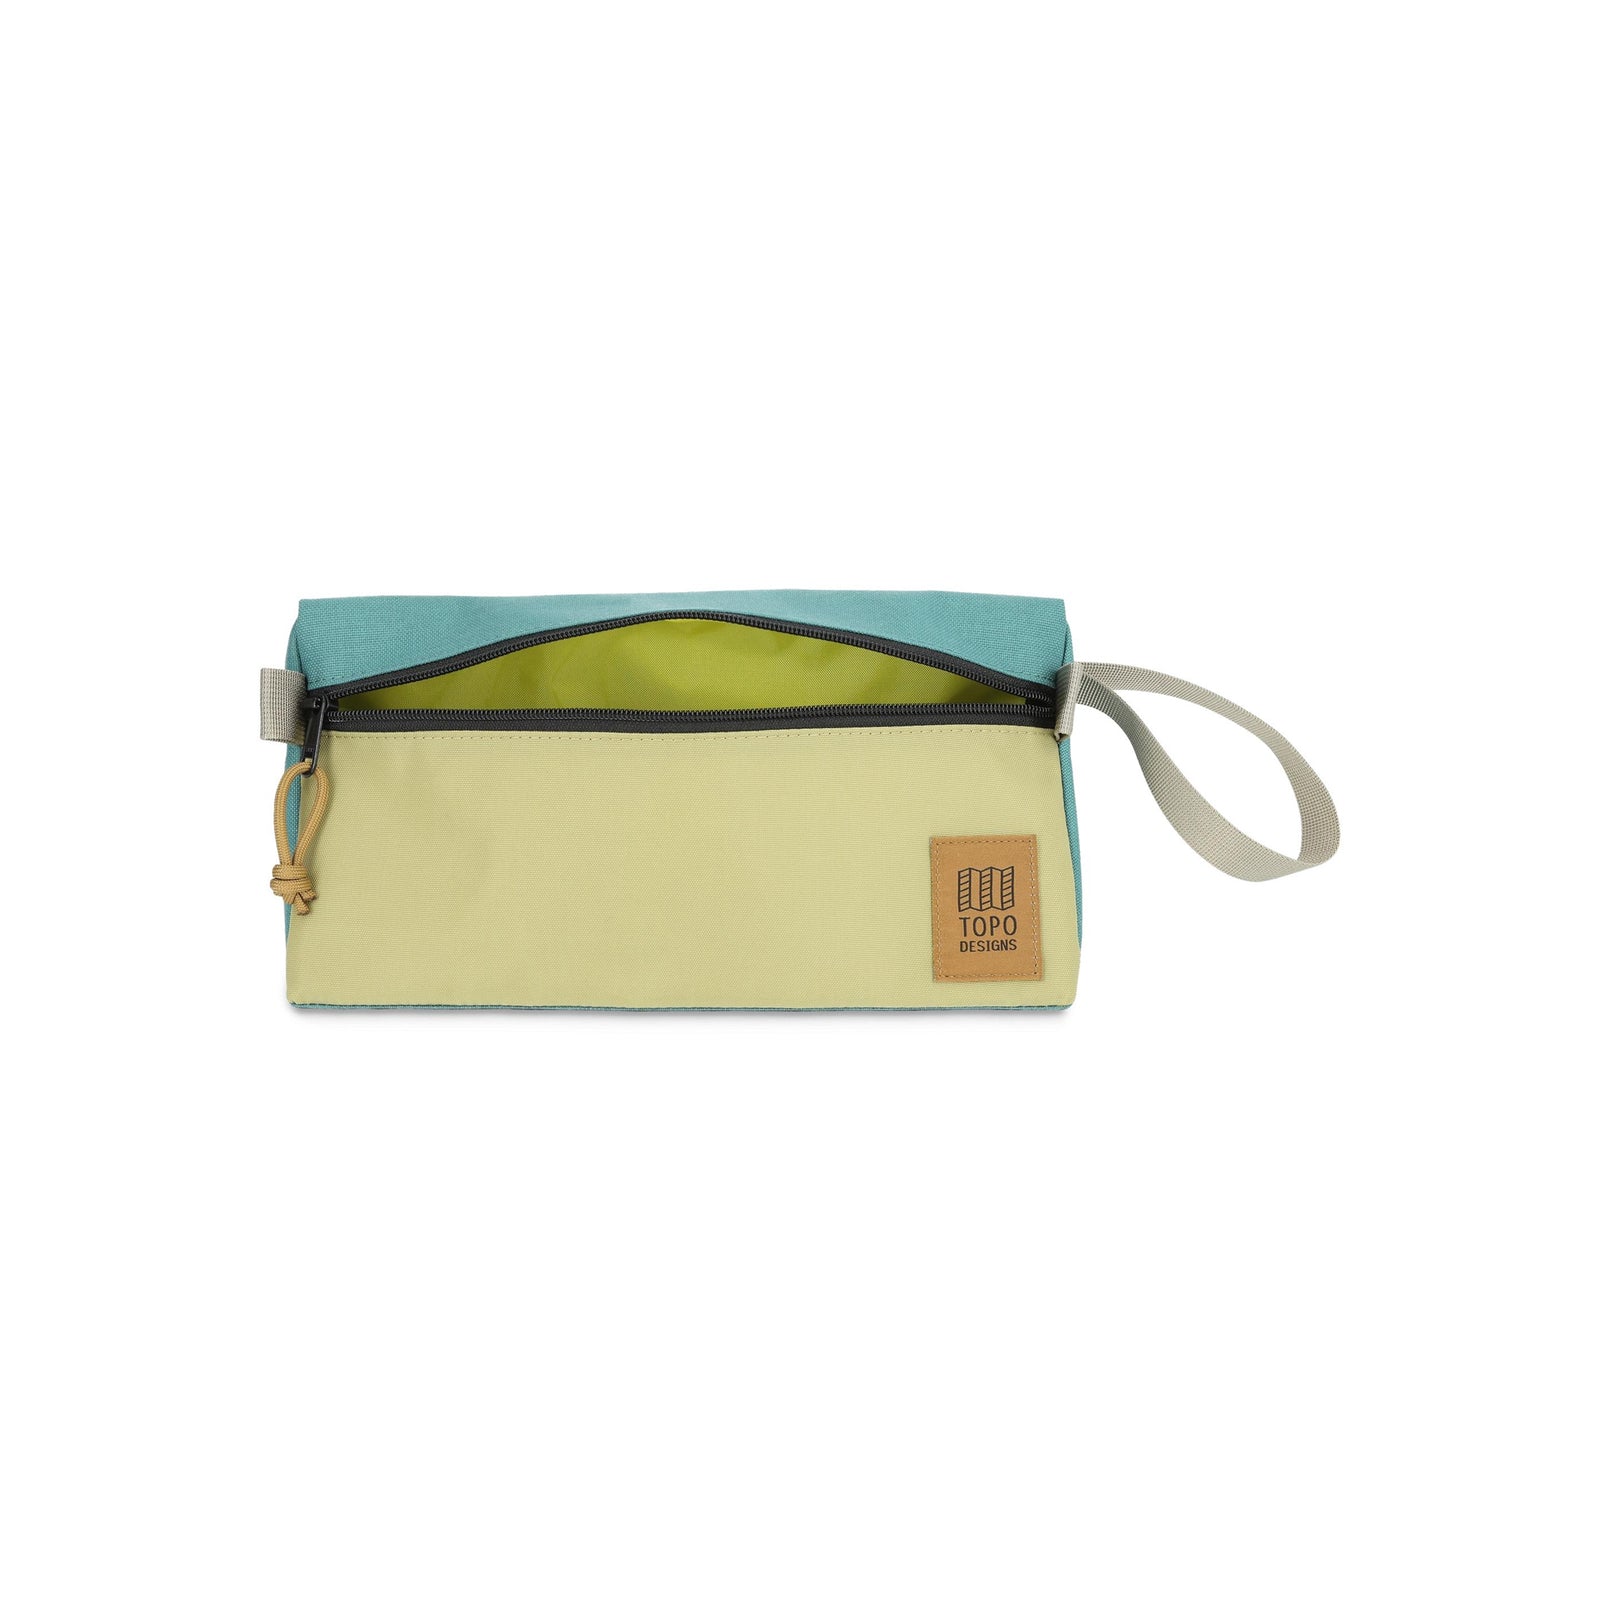 Front View of Topo Designs Dopp Kit in "Caribbean / Moss"